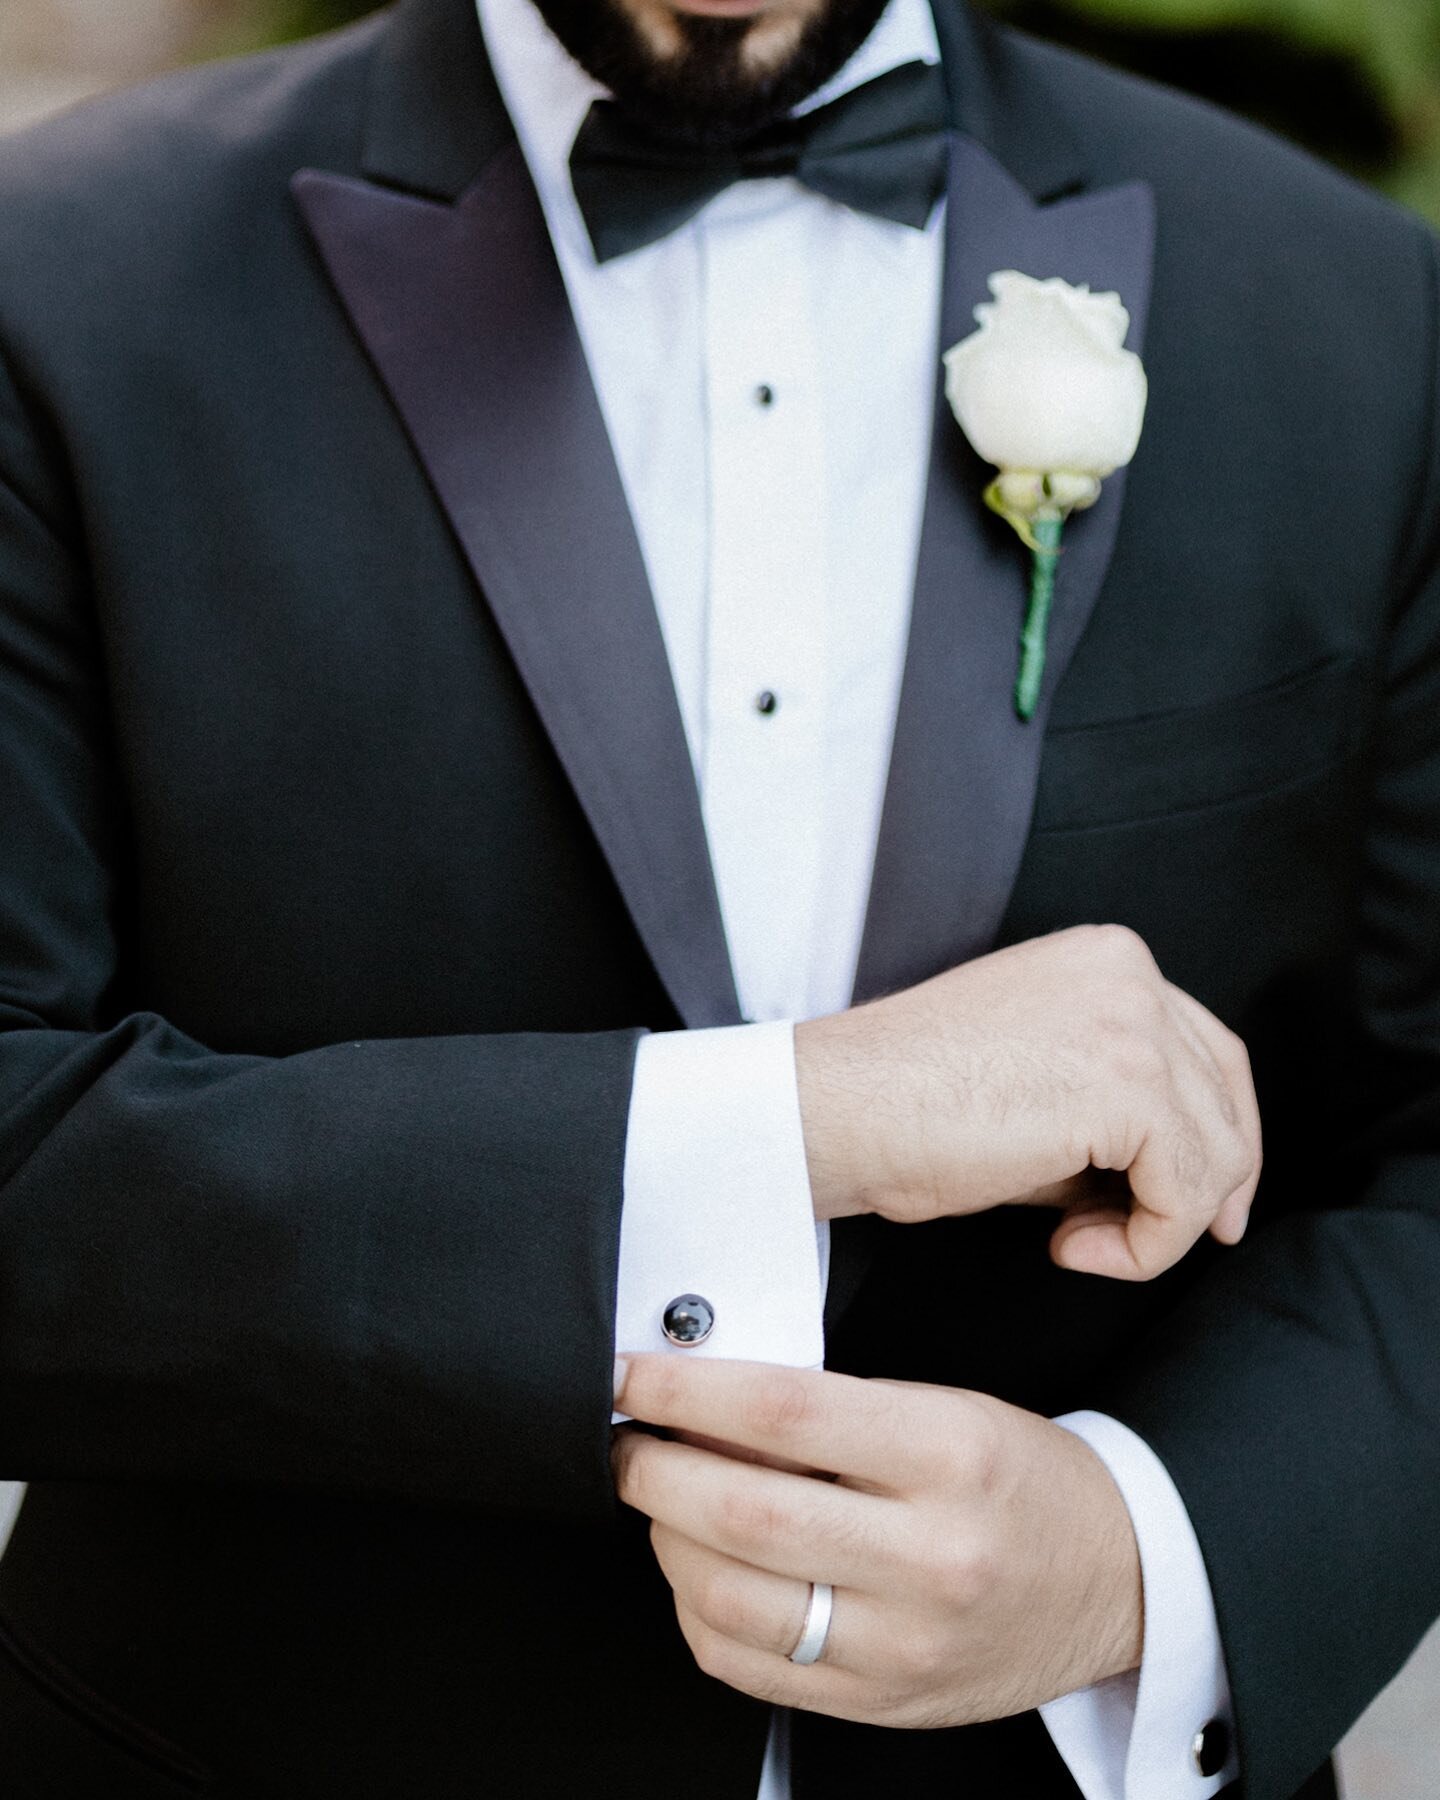 groom details are an absolute must. I know when we think of wedding detail photos  we might think of just photos of the bride getting ready. however, it&rsquo;s so so hype to see a groom in action and how they express their nerves before seeing their